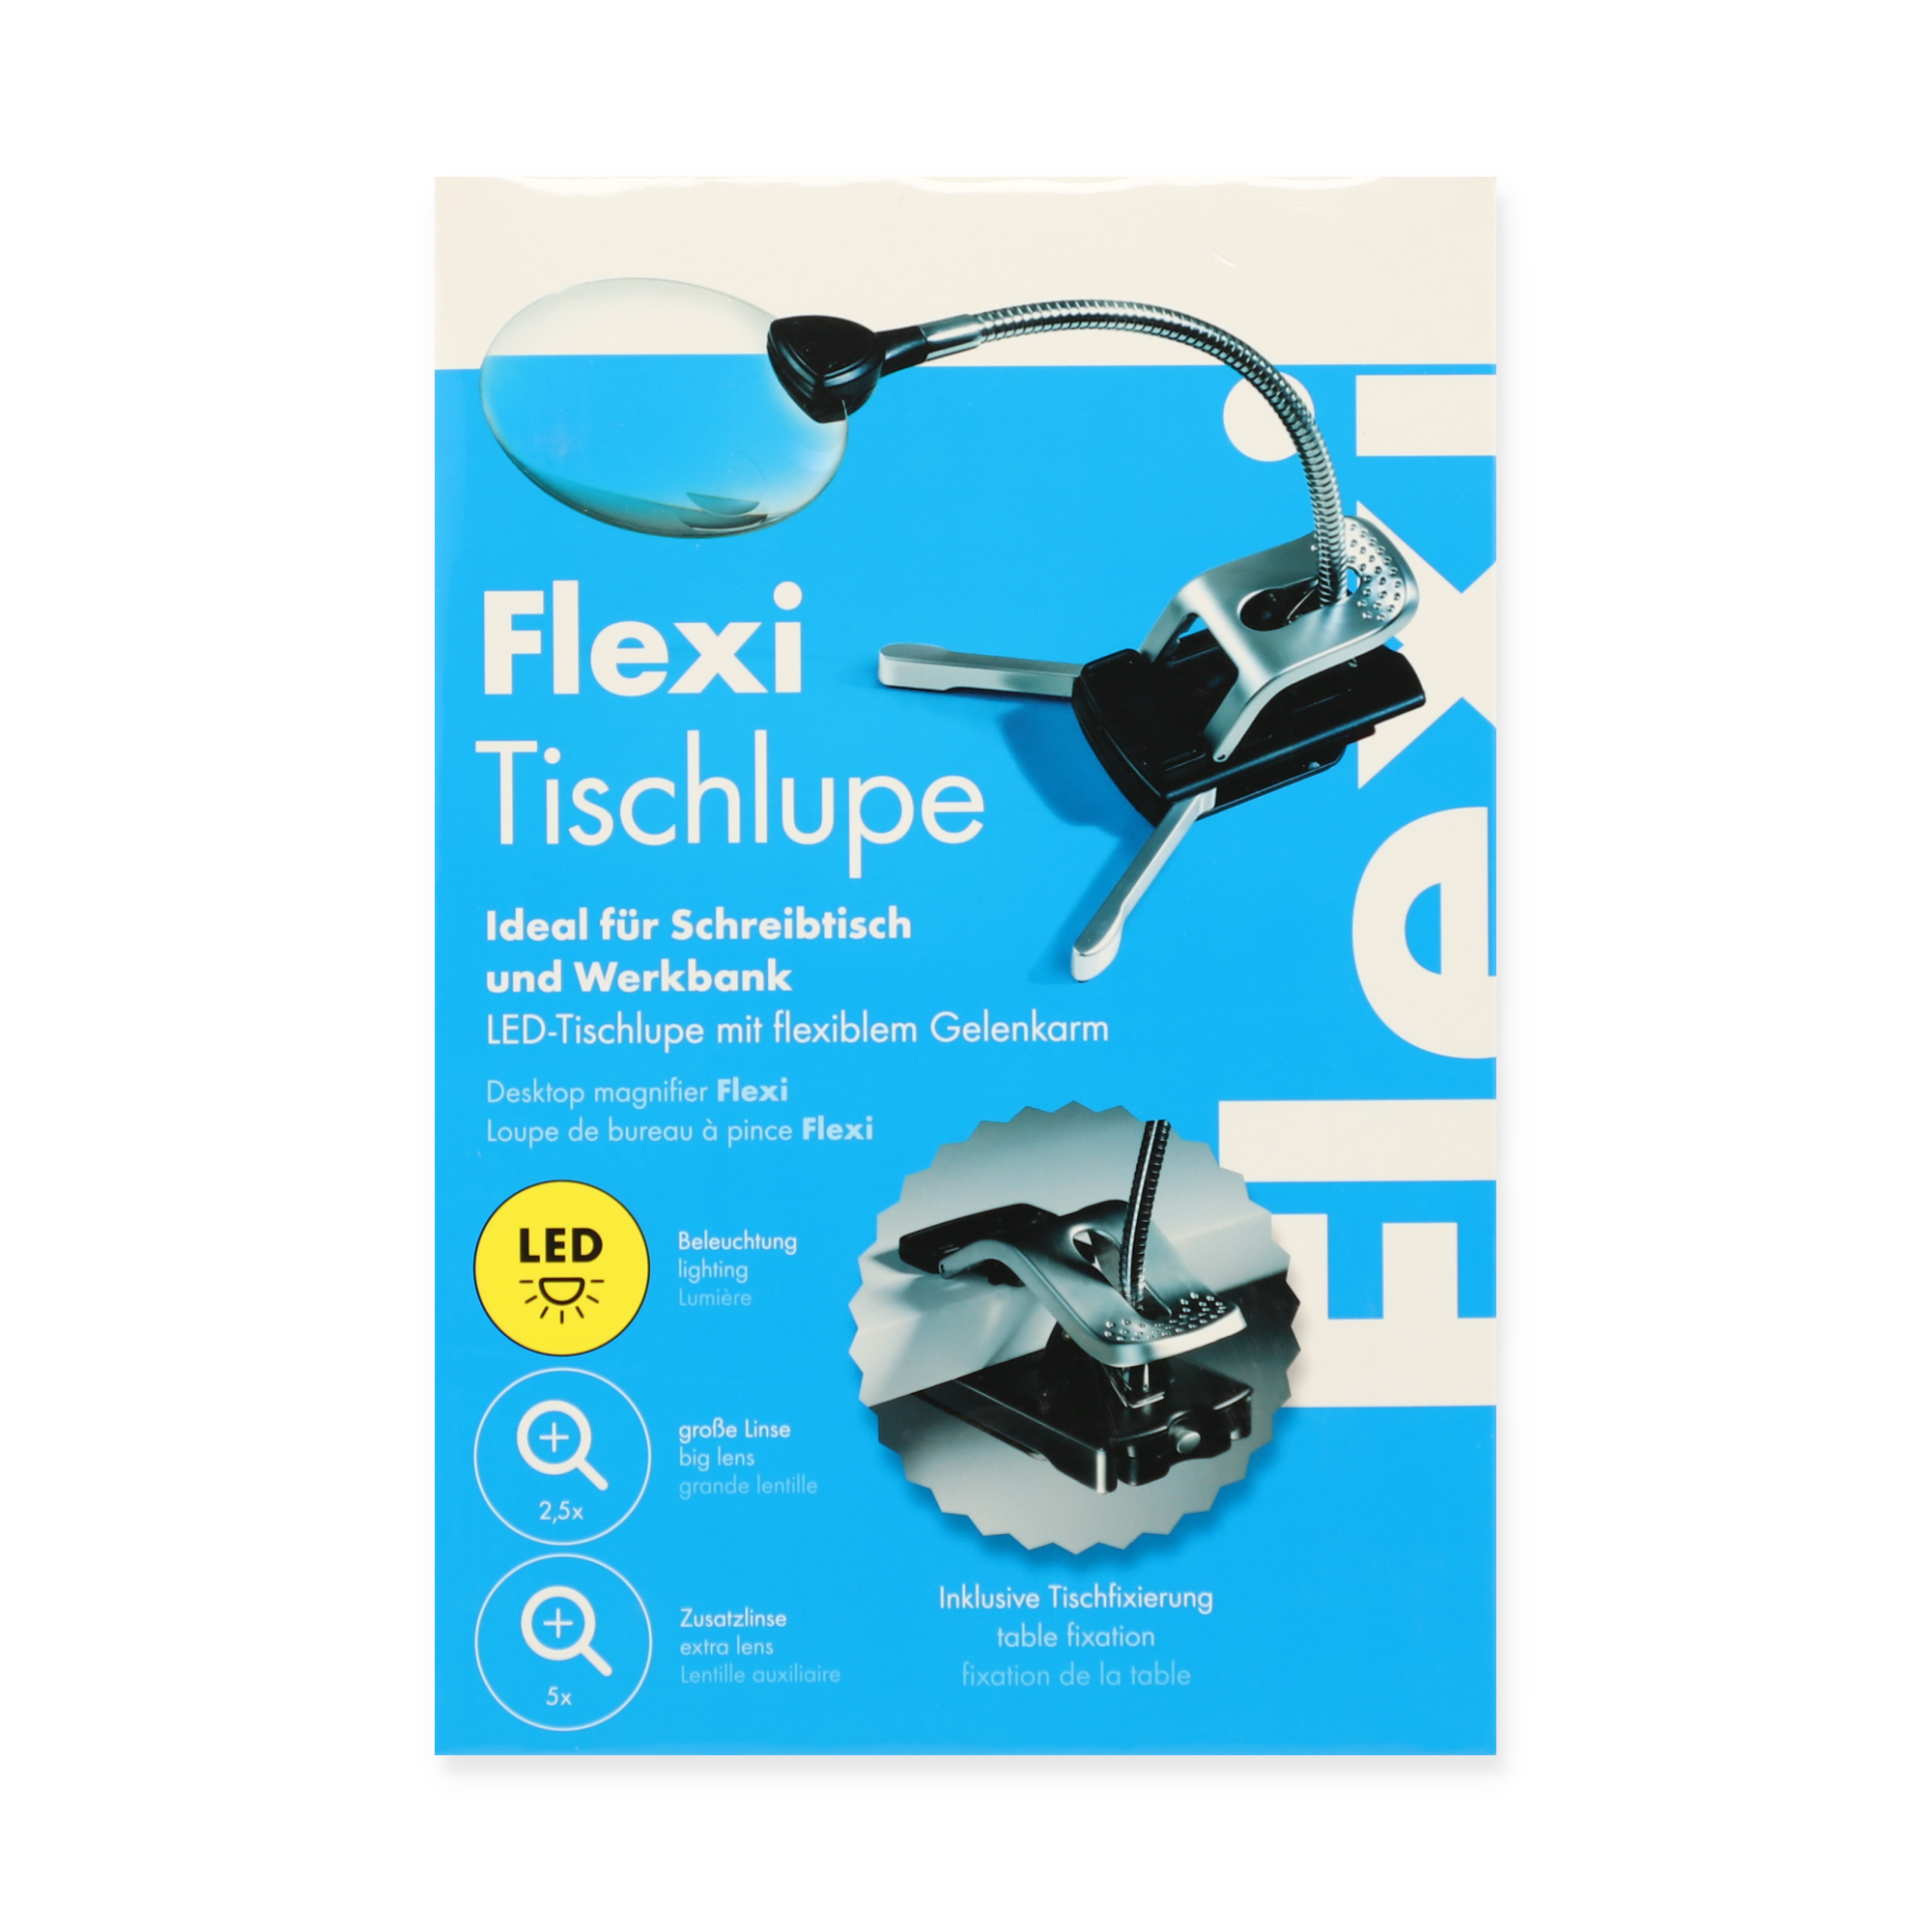 LED-Tischlupe 'Flexi' Ø 88 mm + product picture